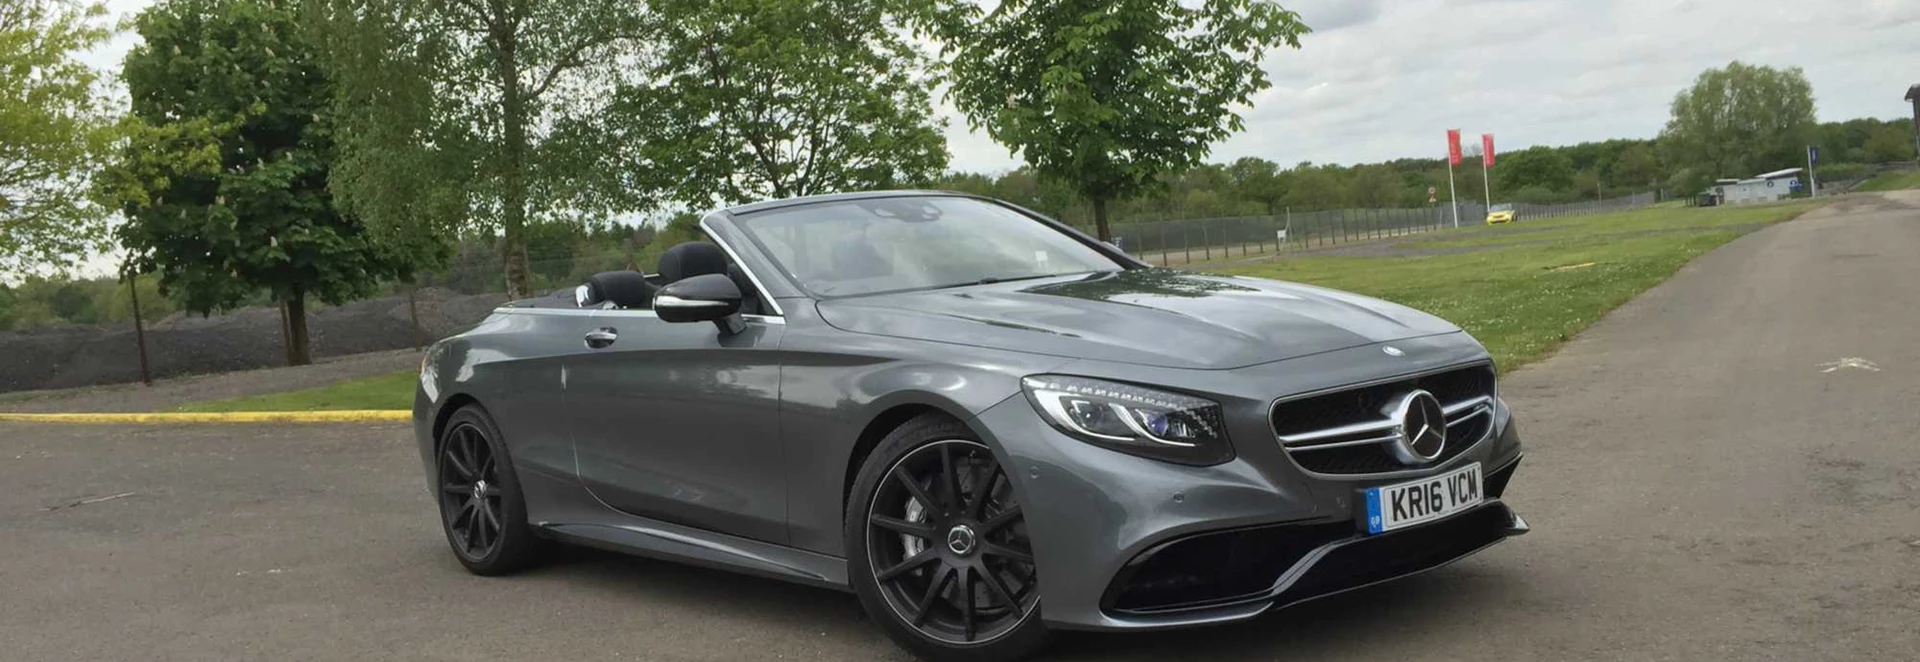 Mercedes AMG S 63 Cabriolet review 